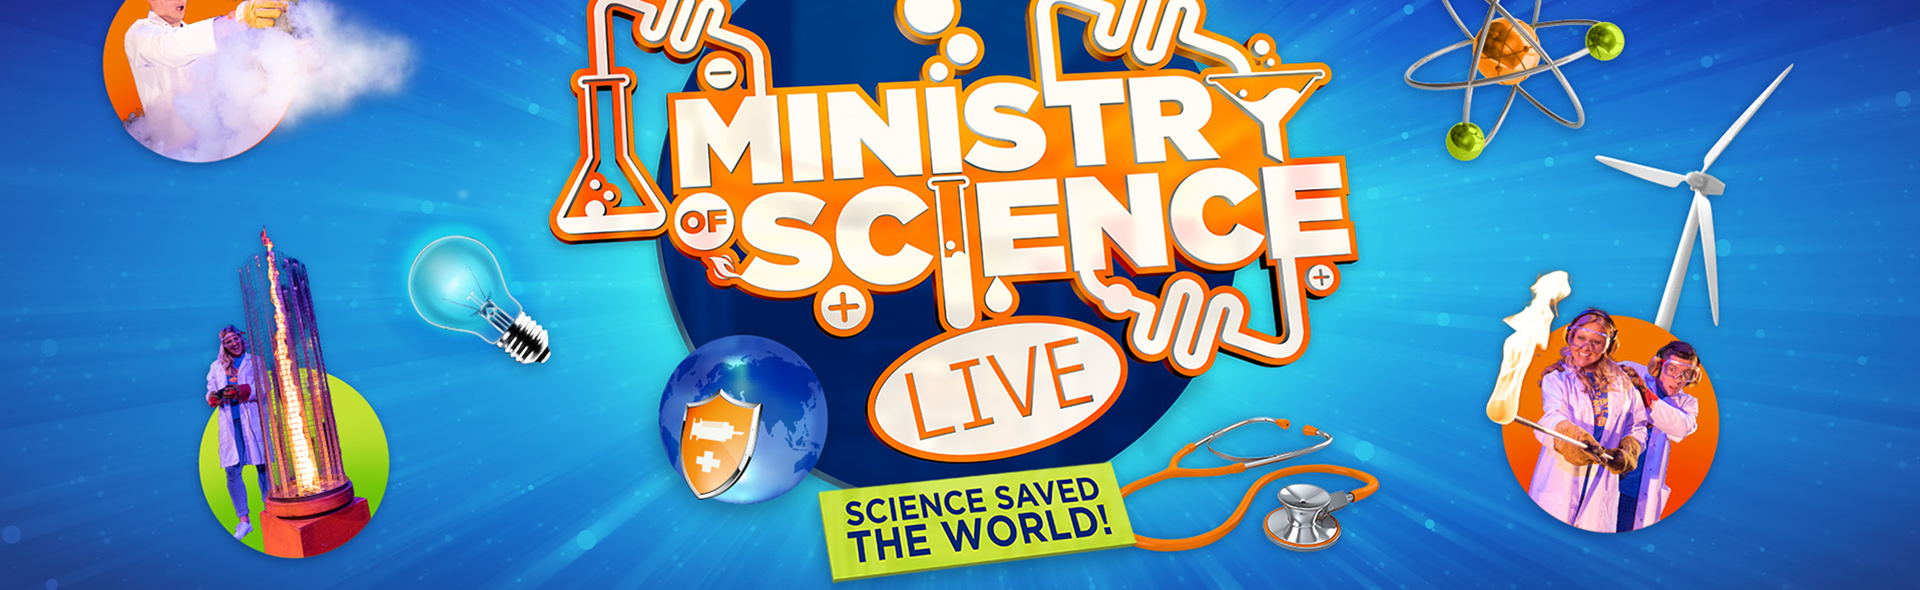 Ministry Of Science LIVE - Science Saved The World